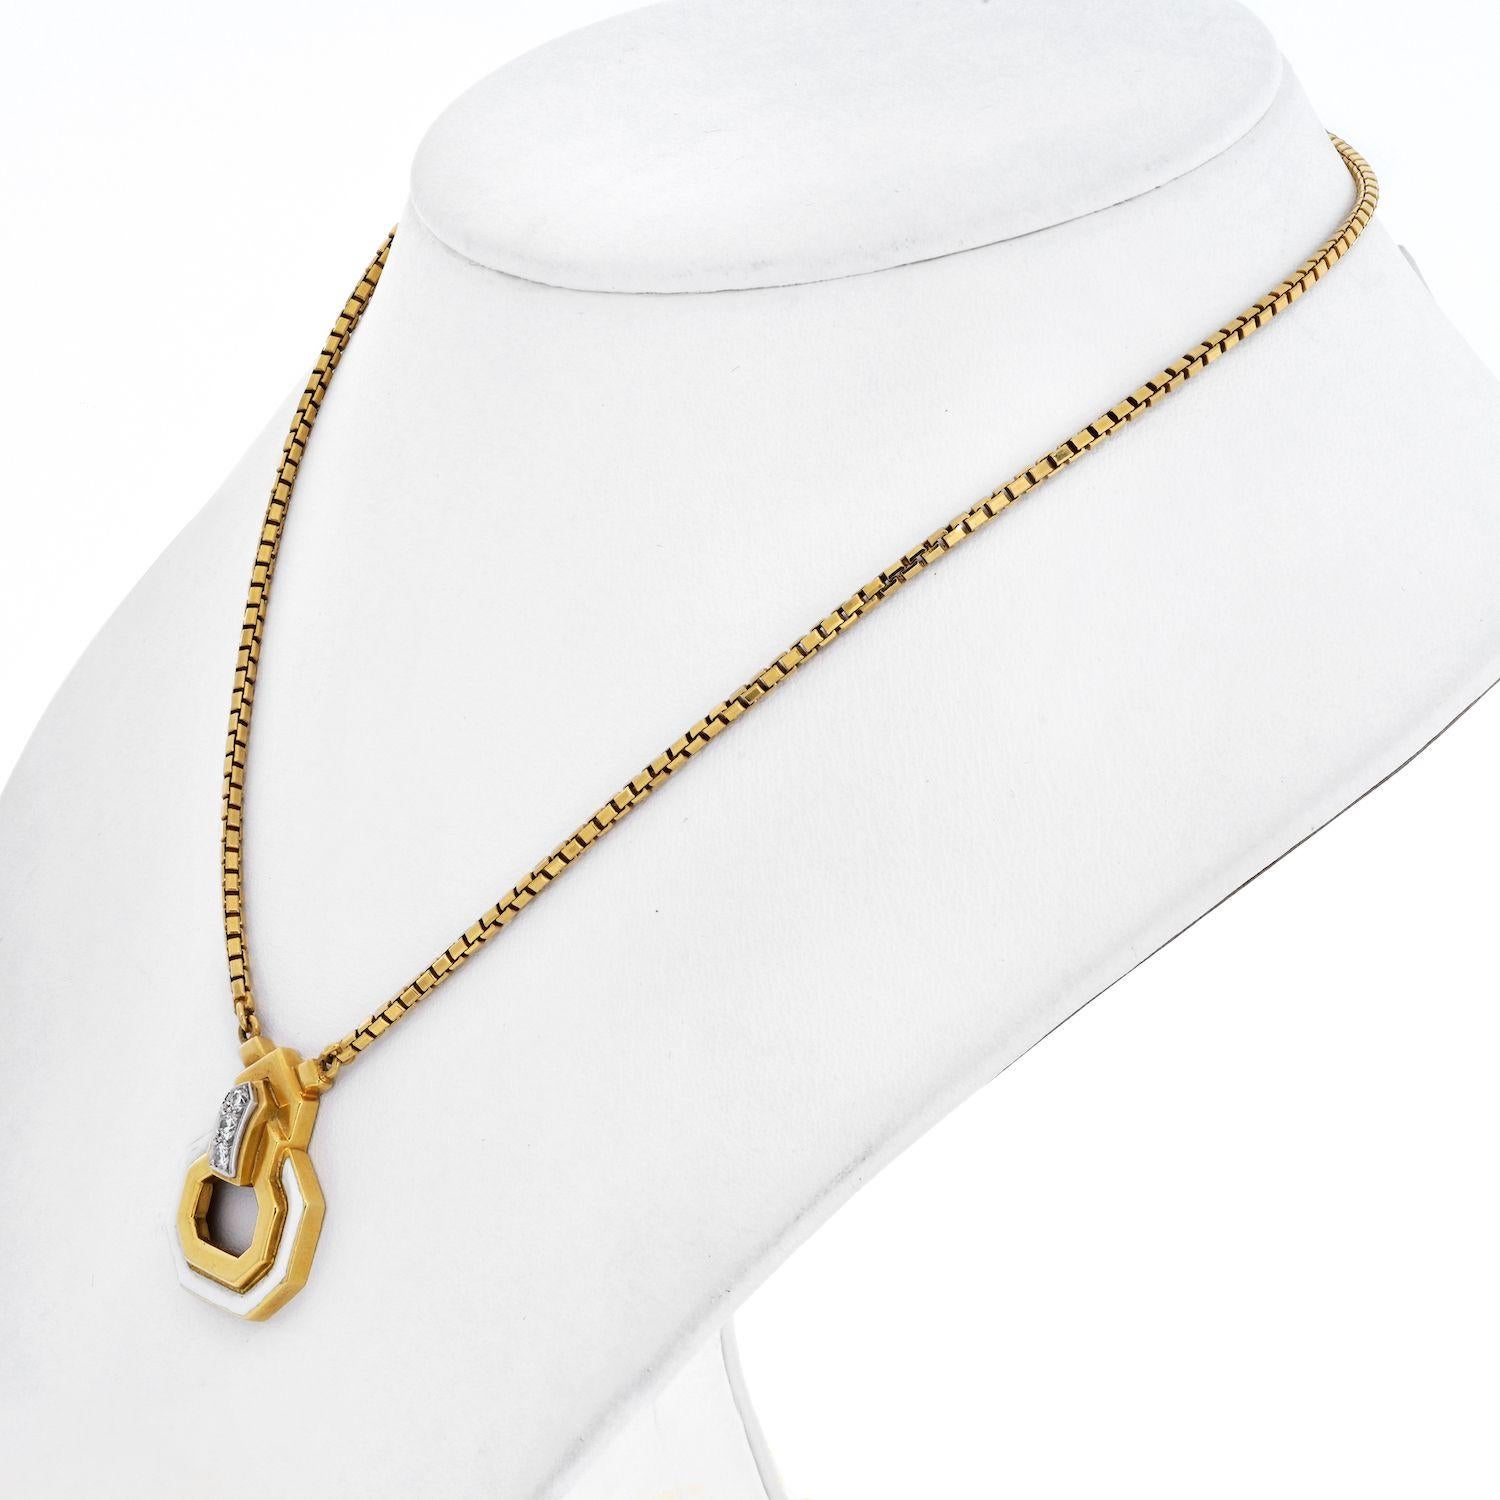 Lovely 18k yellow gold pendant with signature white enameling and a touch of diamonds by David Webb. Box chain width 2mm. Chain length 15 inches. 
Length: 25mm
Width: 20mm